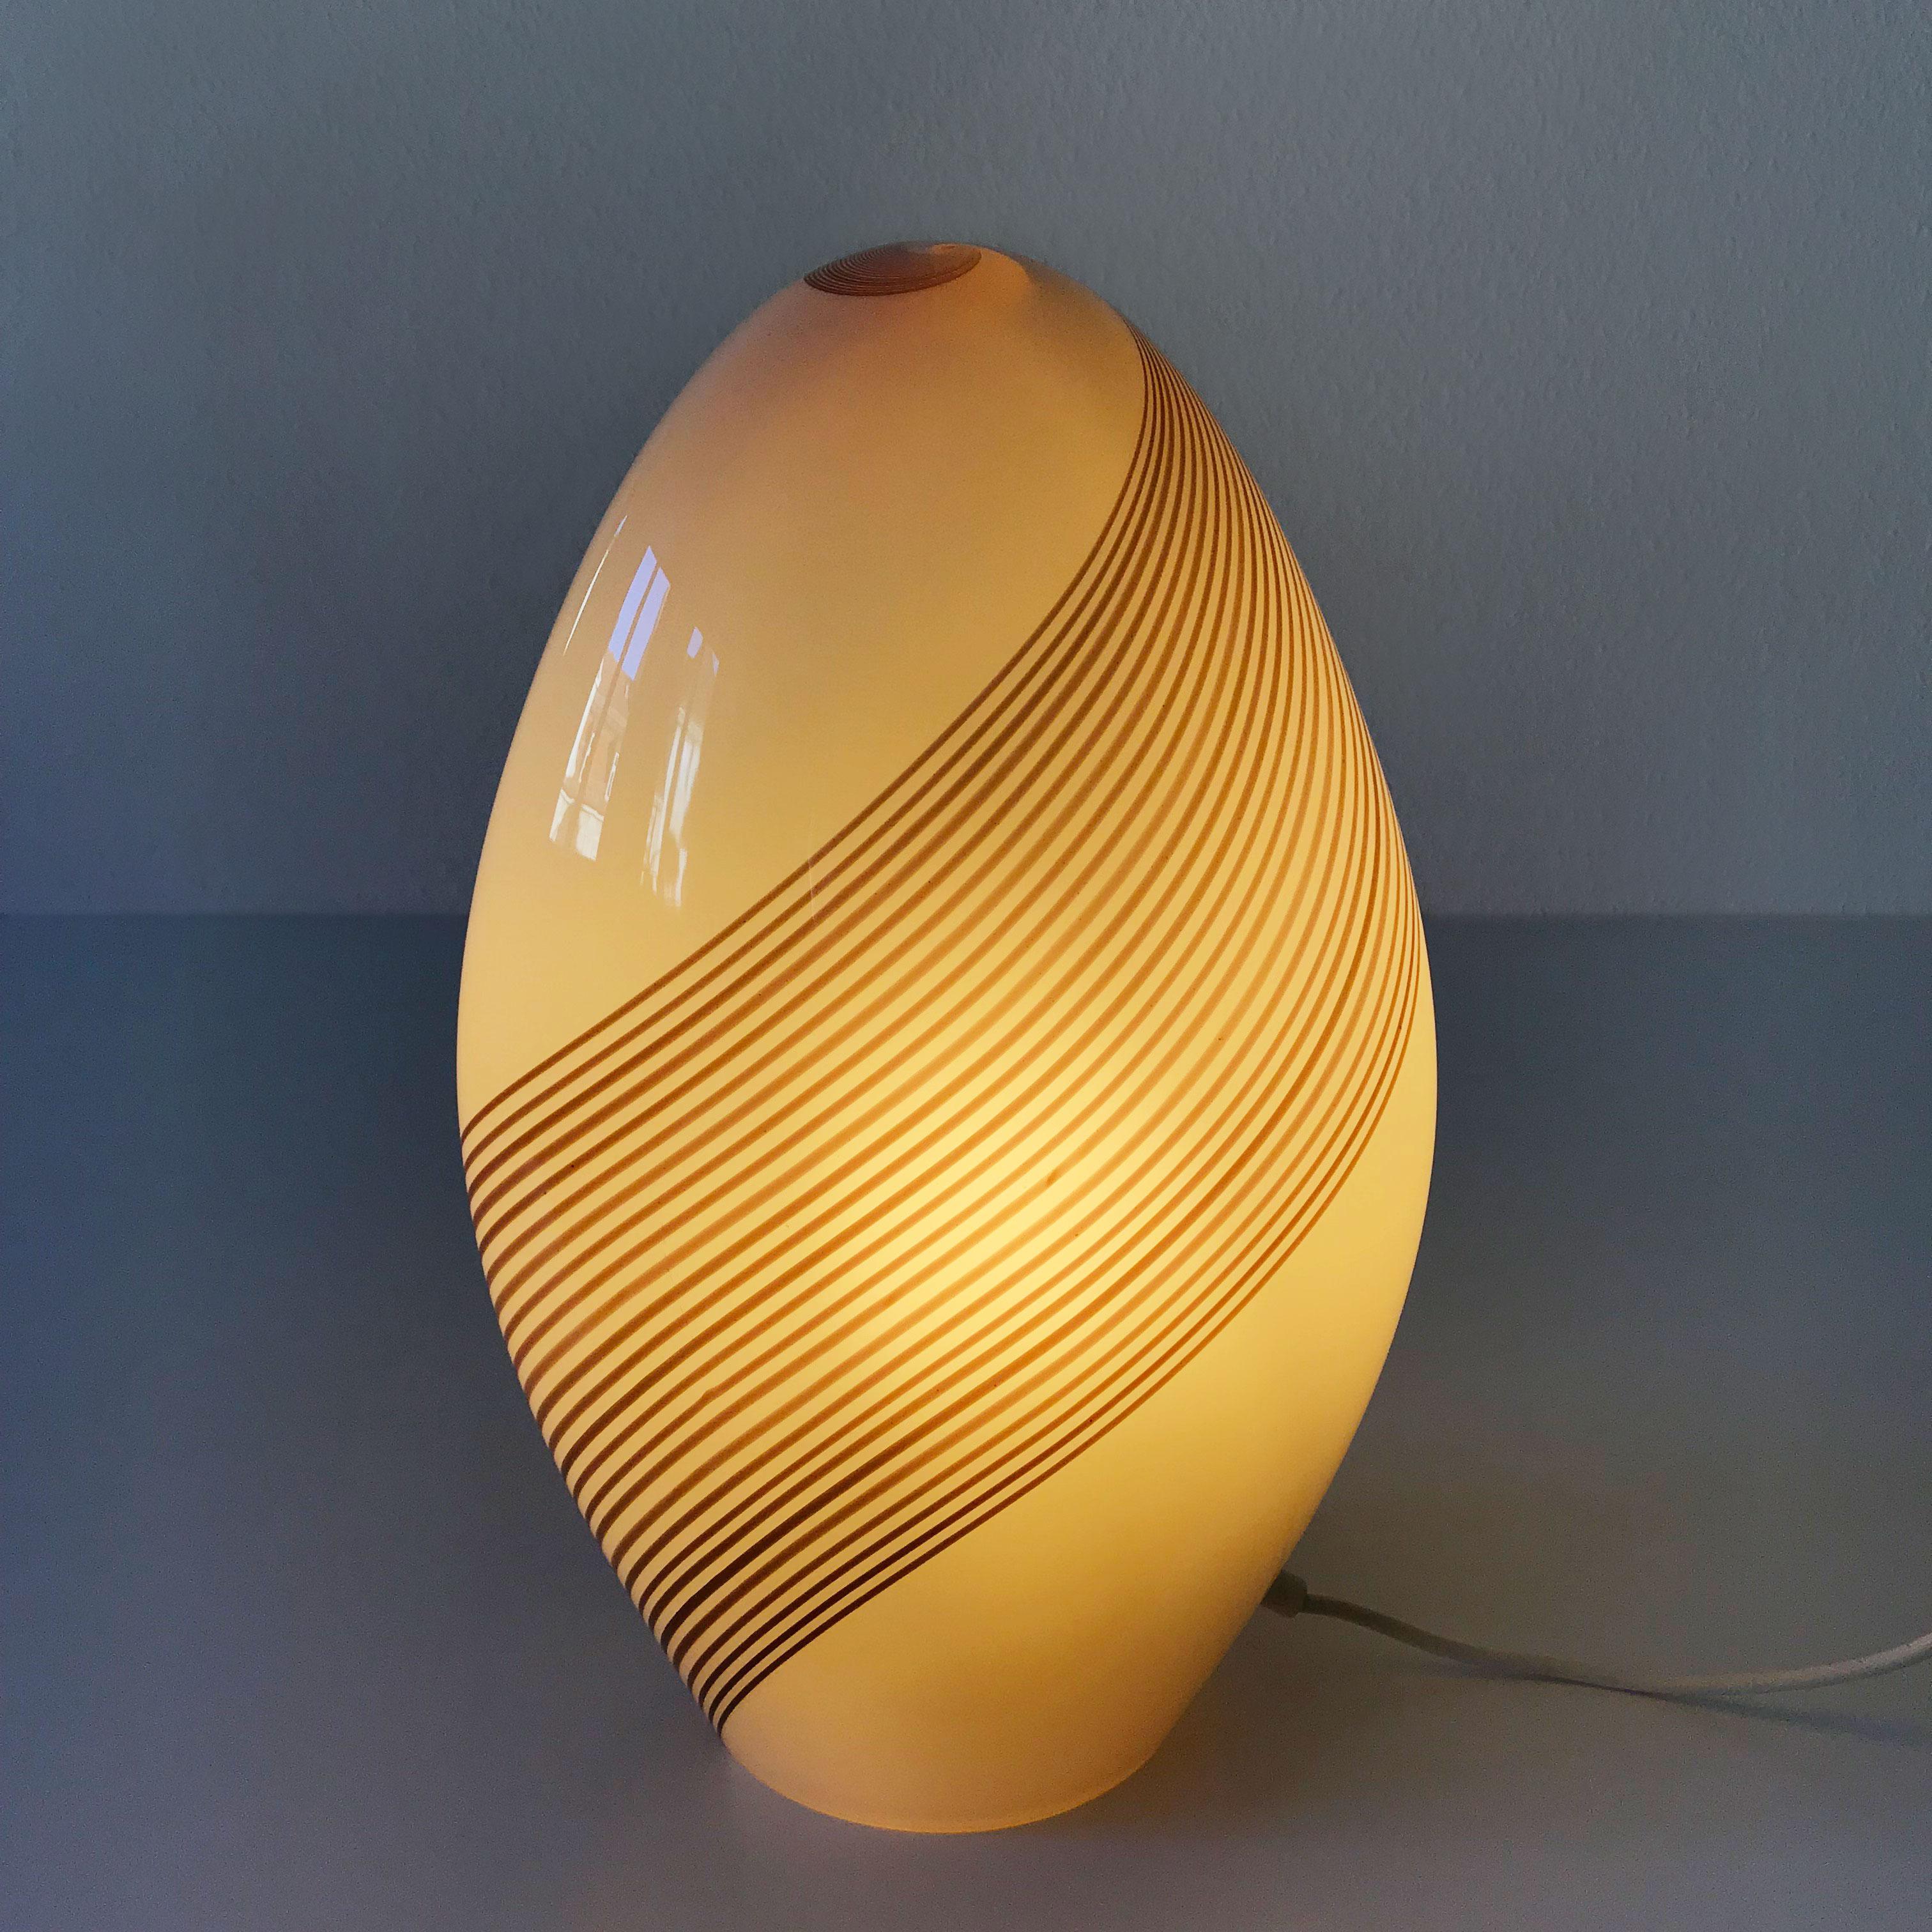 Exceptional Murano Glass Table Lamp by Lino Tagliapietra for Effetre 1980s Italy For Sale 1